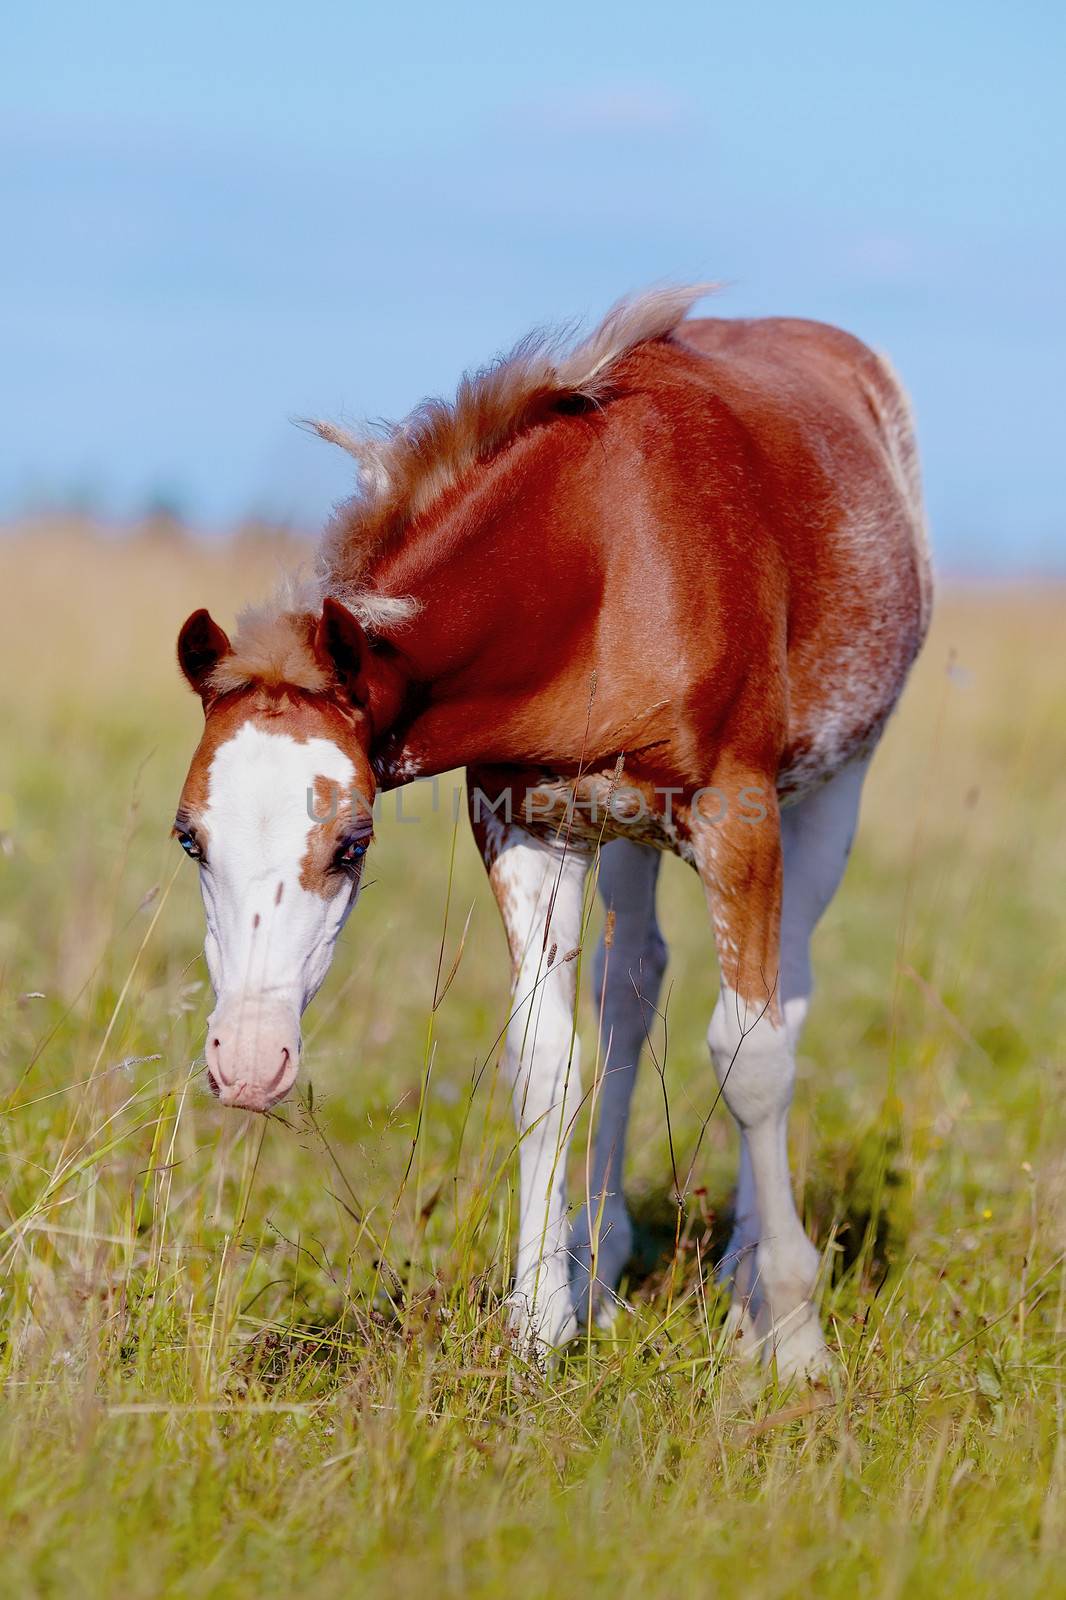 Foal on a meadow. The horse is grazed. Horse on a pasture. The horse eats a grass.